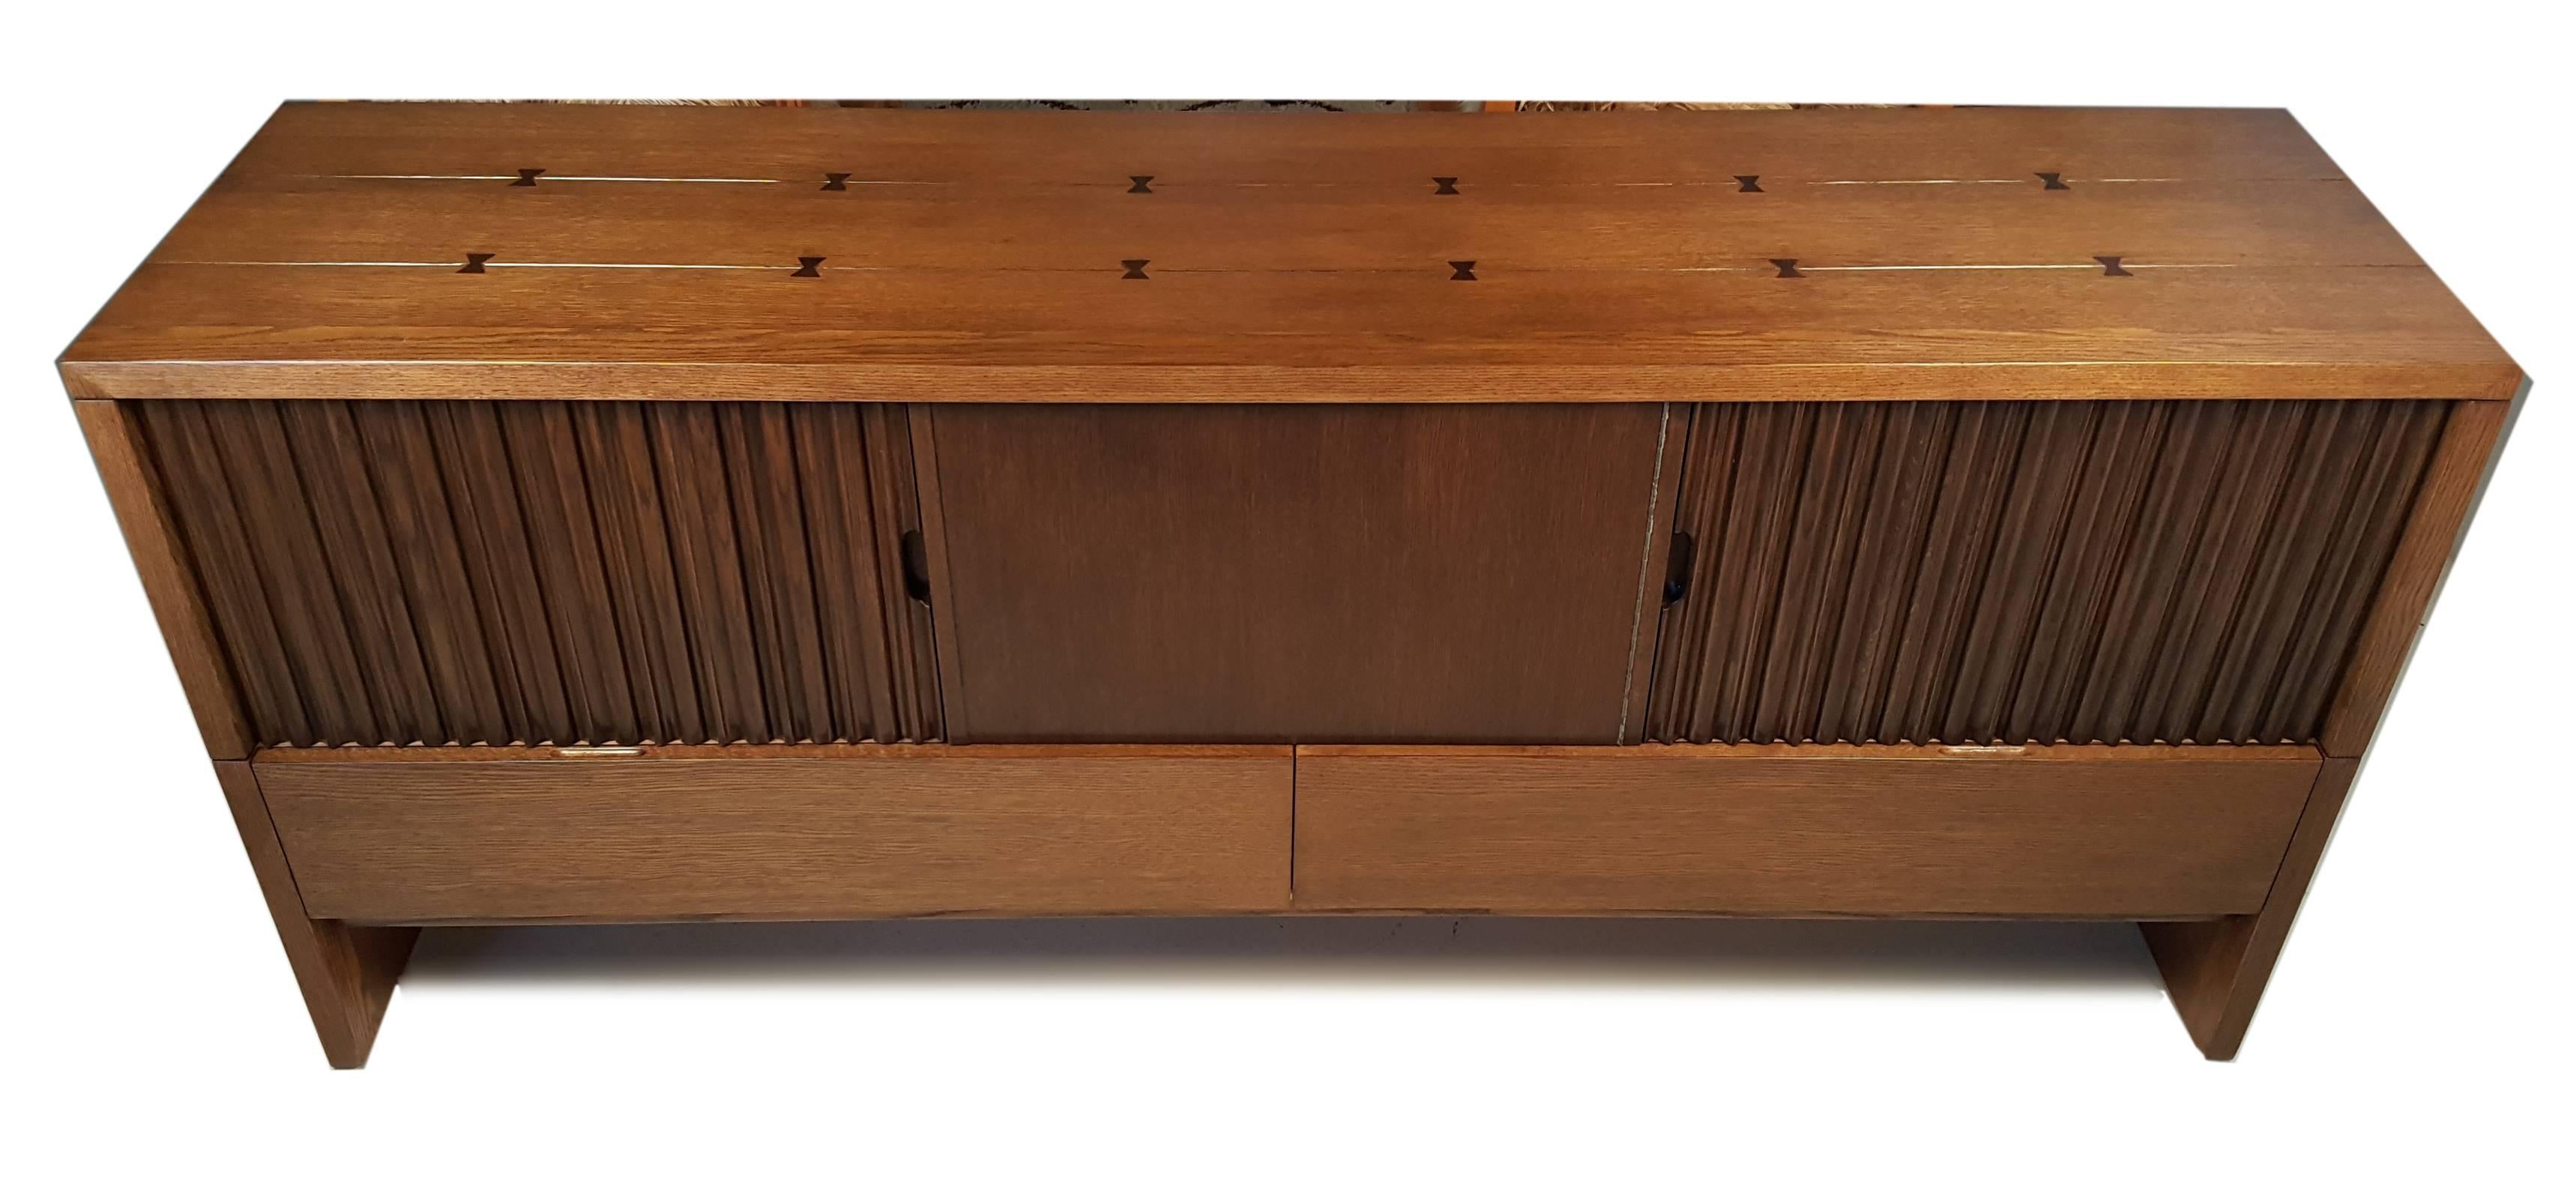 Stunning oak credenza by Harold Schwartz for Romweber. The inlaid butterfly joiner on the cabinet is quite striking. This sideboard is the largest from the series. It has been professionally refinished and is in remarkable condition. There is a nice